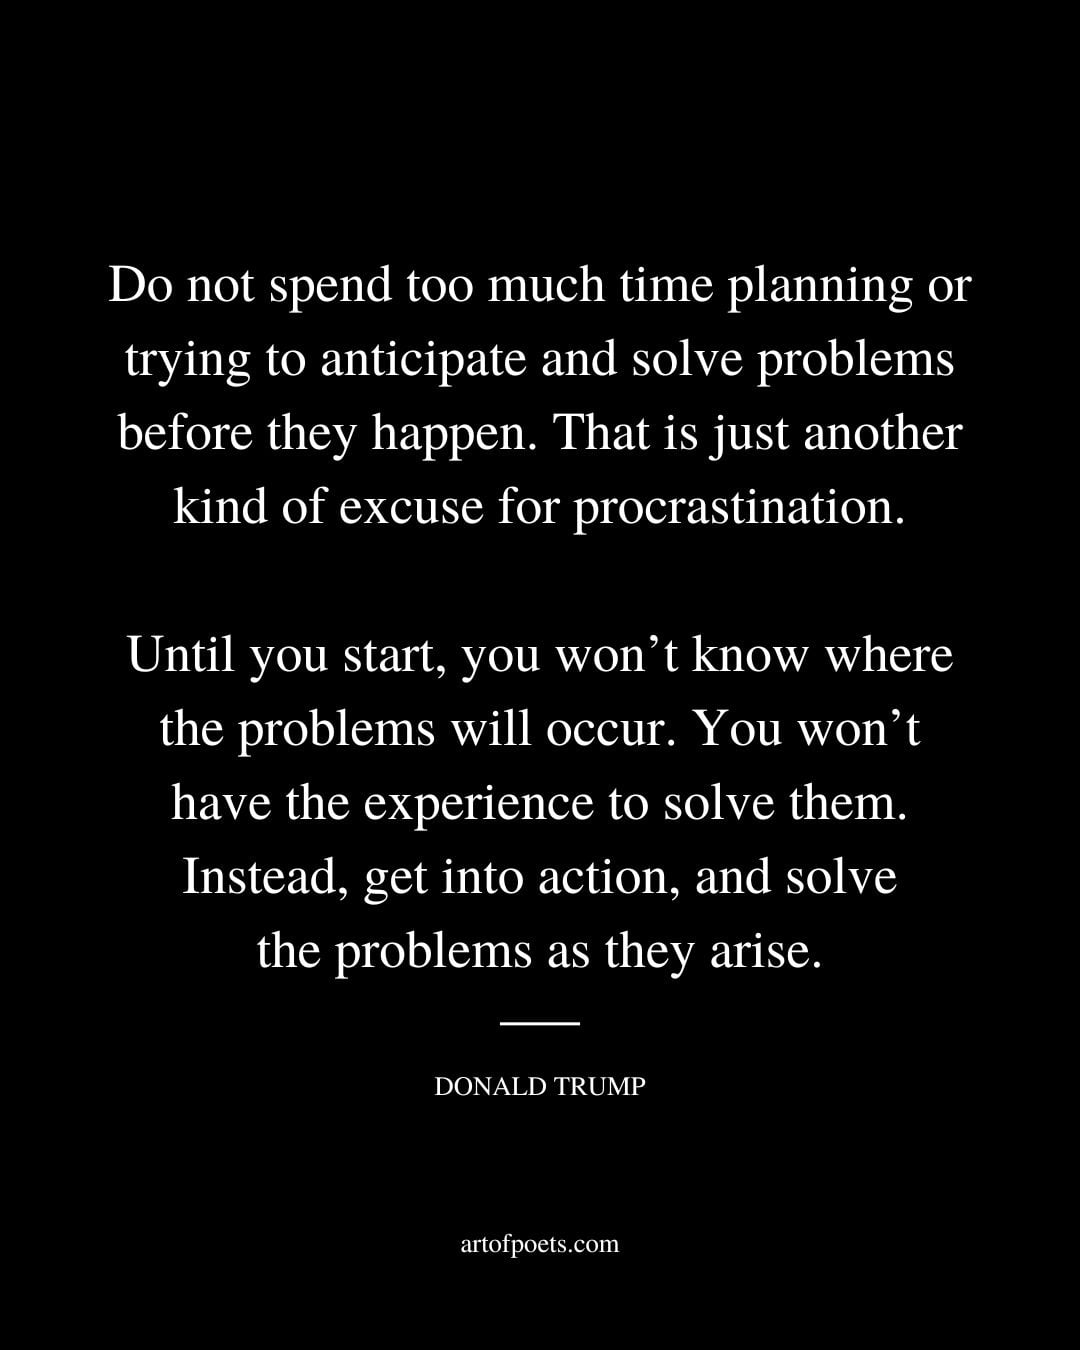 Do not spend too much time planning or trying to anticipate and solve problems before they happen